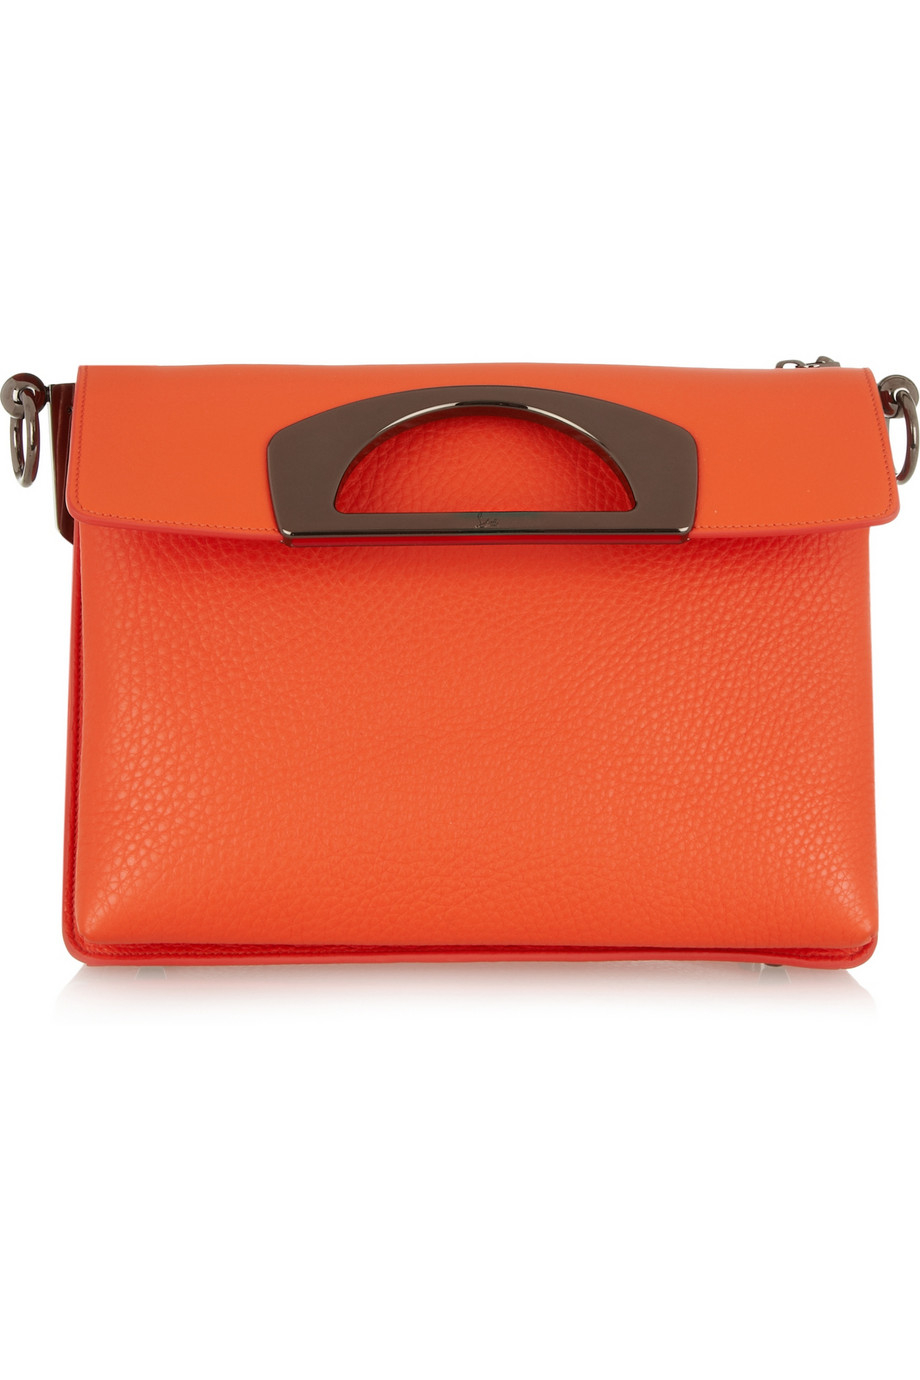 Lyst - Christian louboutin Passage Textured-Leather Shoulder Bag in Orange